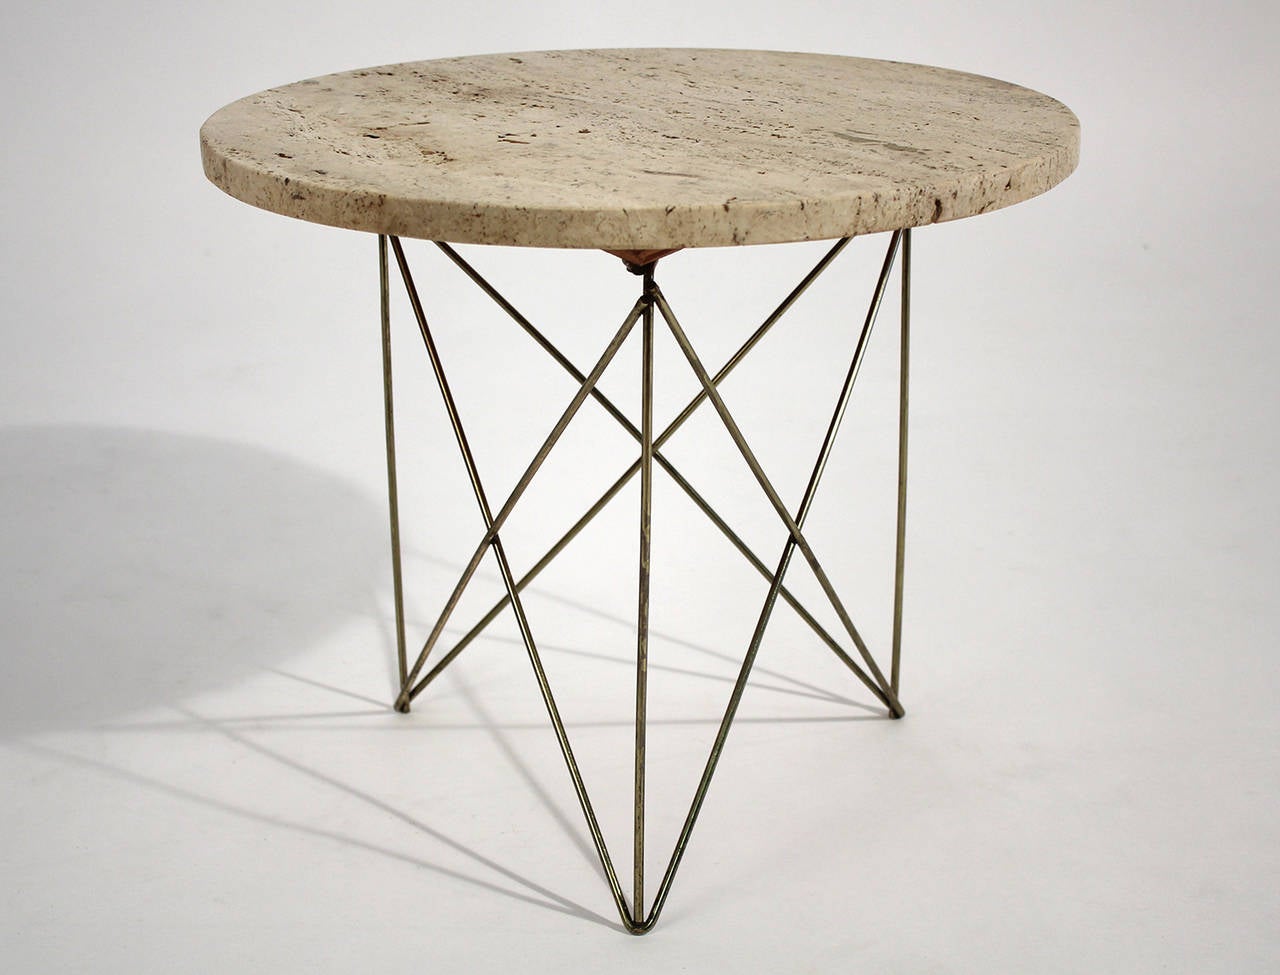 Versatile small scale side table with wire strut base and round travertine top designed and made by California designer Rene Brancusi, circa 1950s.